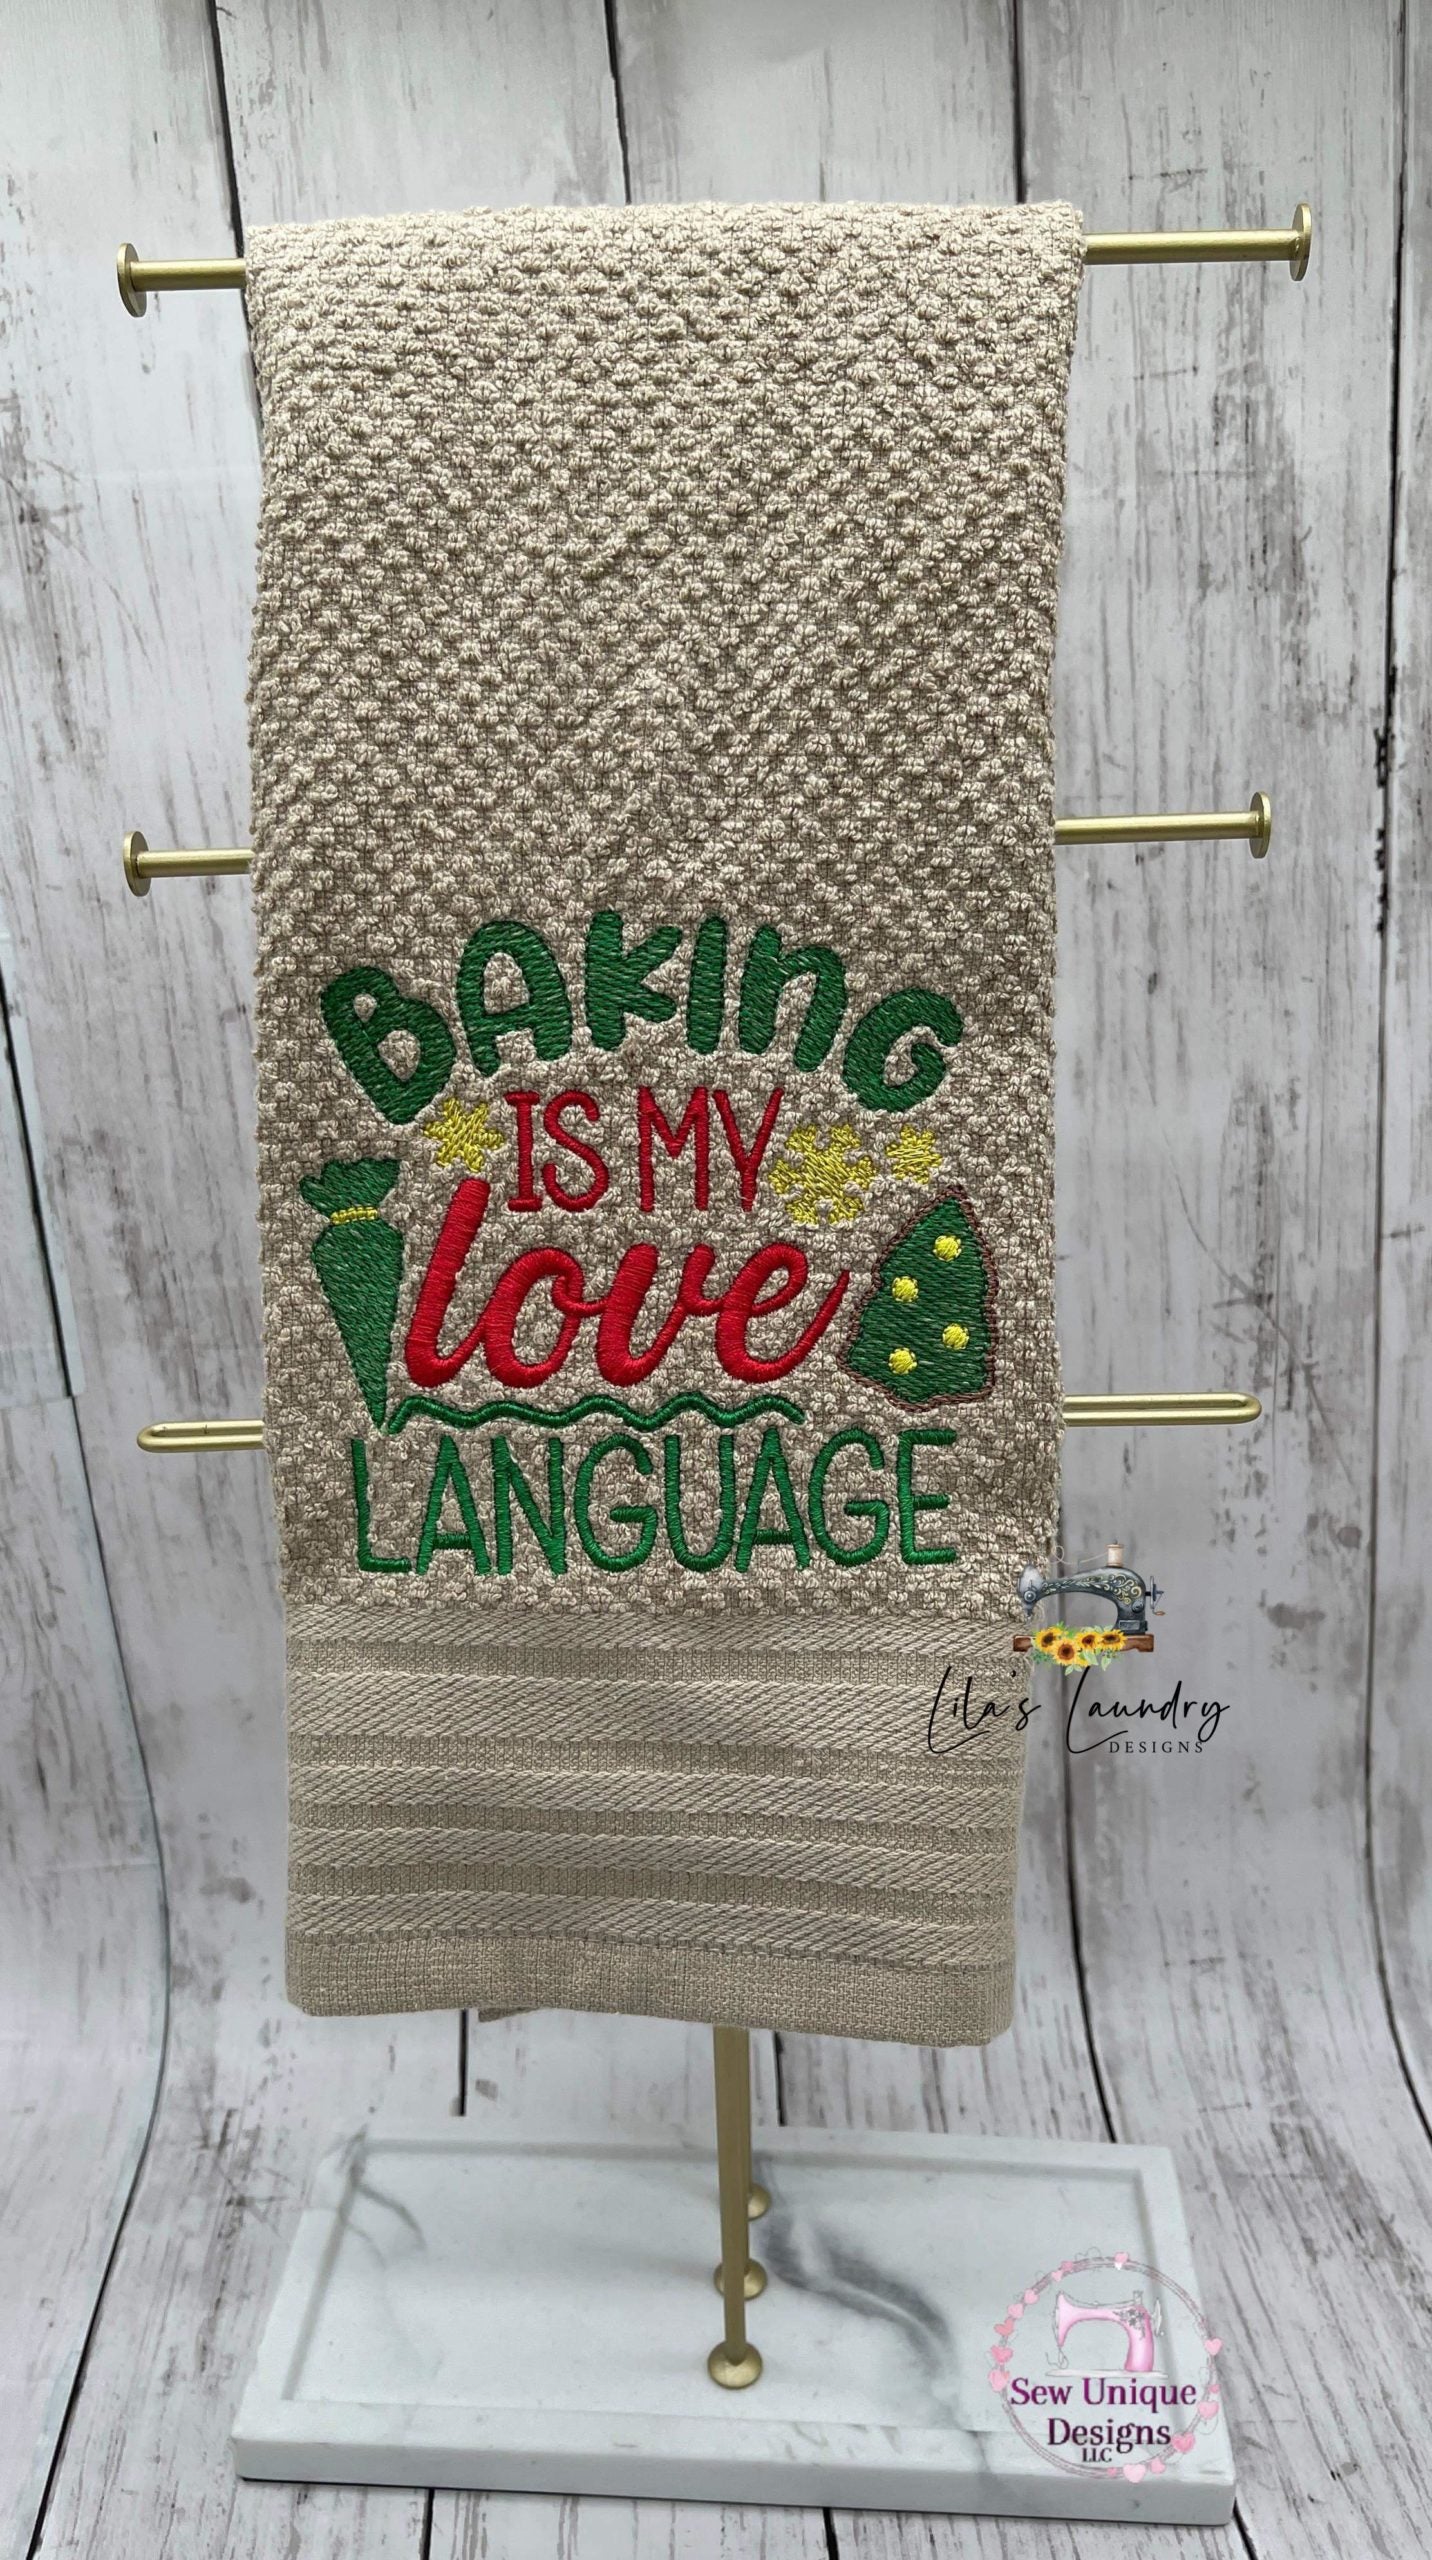 Baking is my Love Language - 3 sizes- Digital Embroidery Design